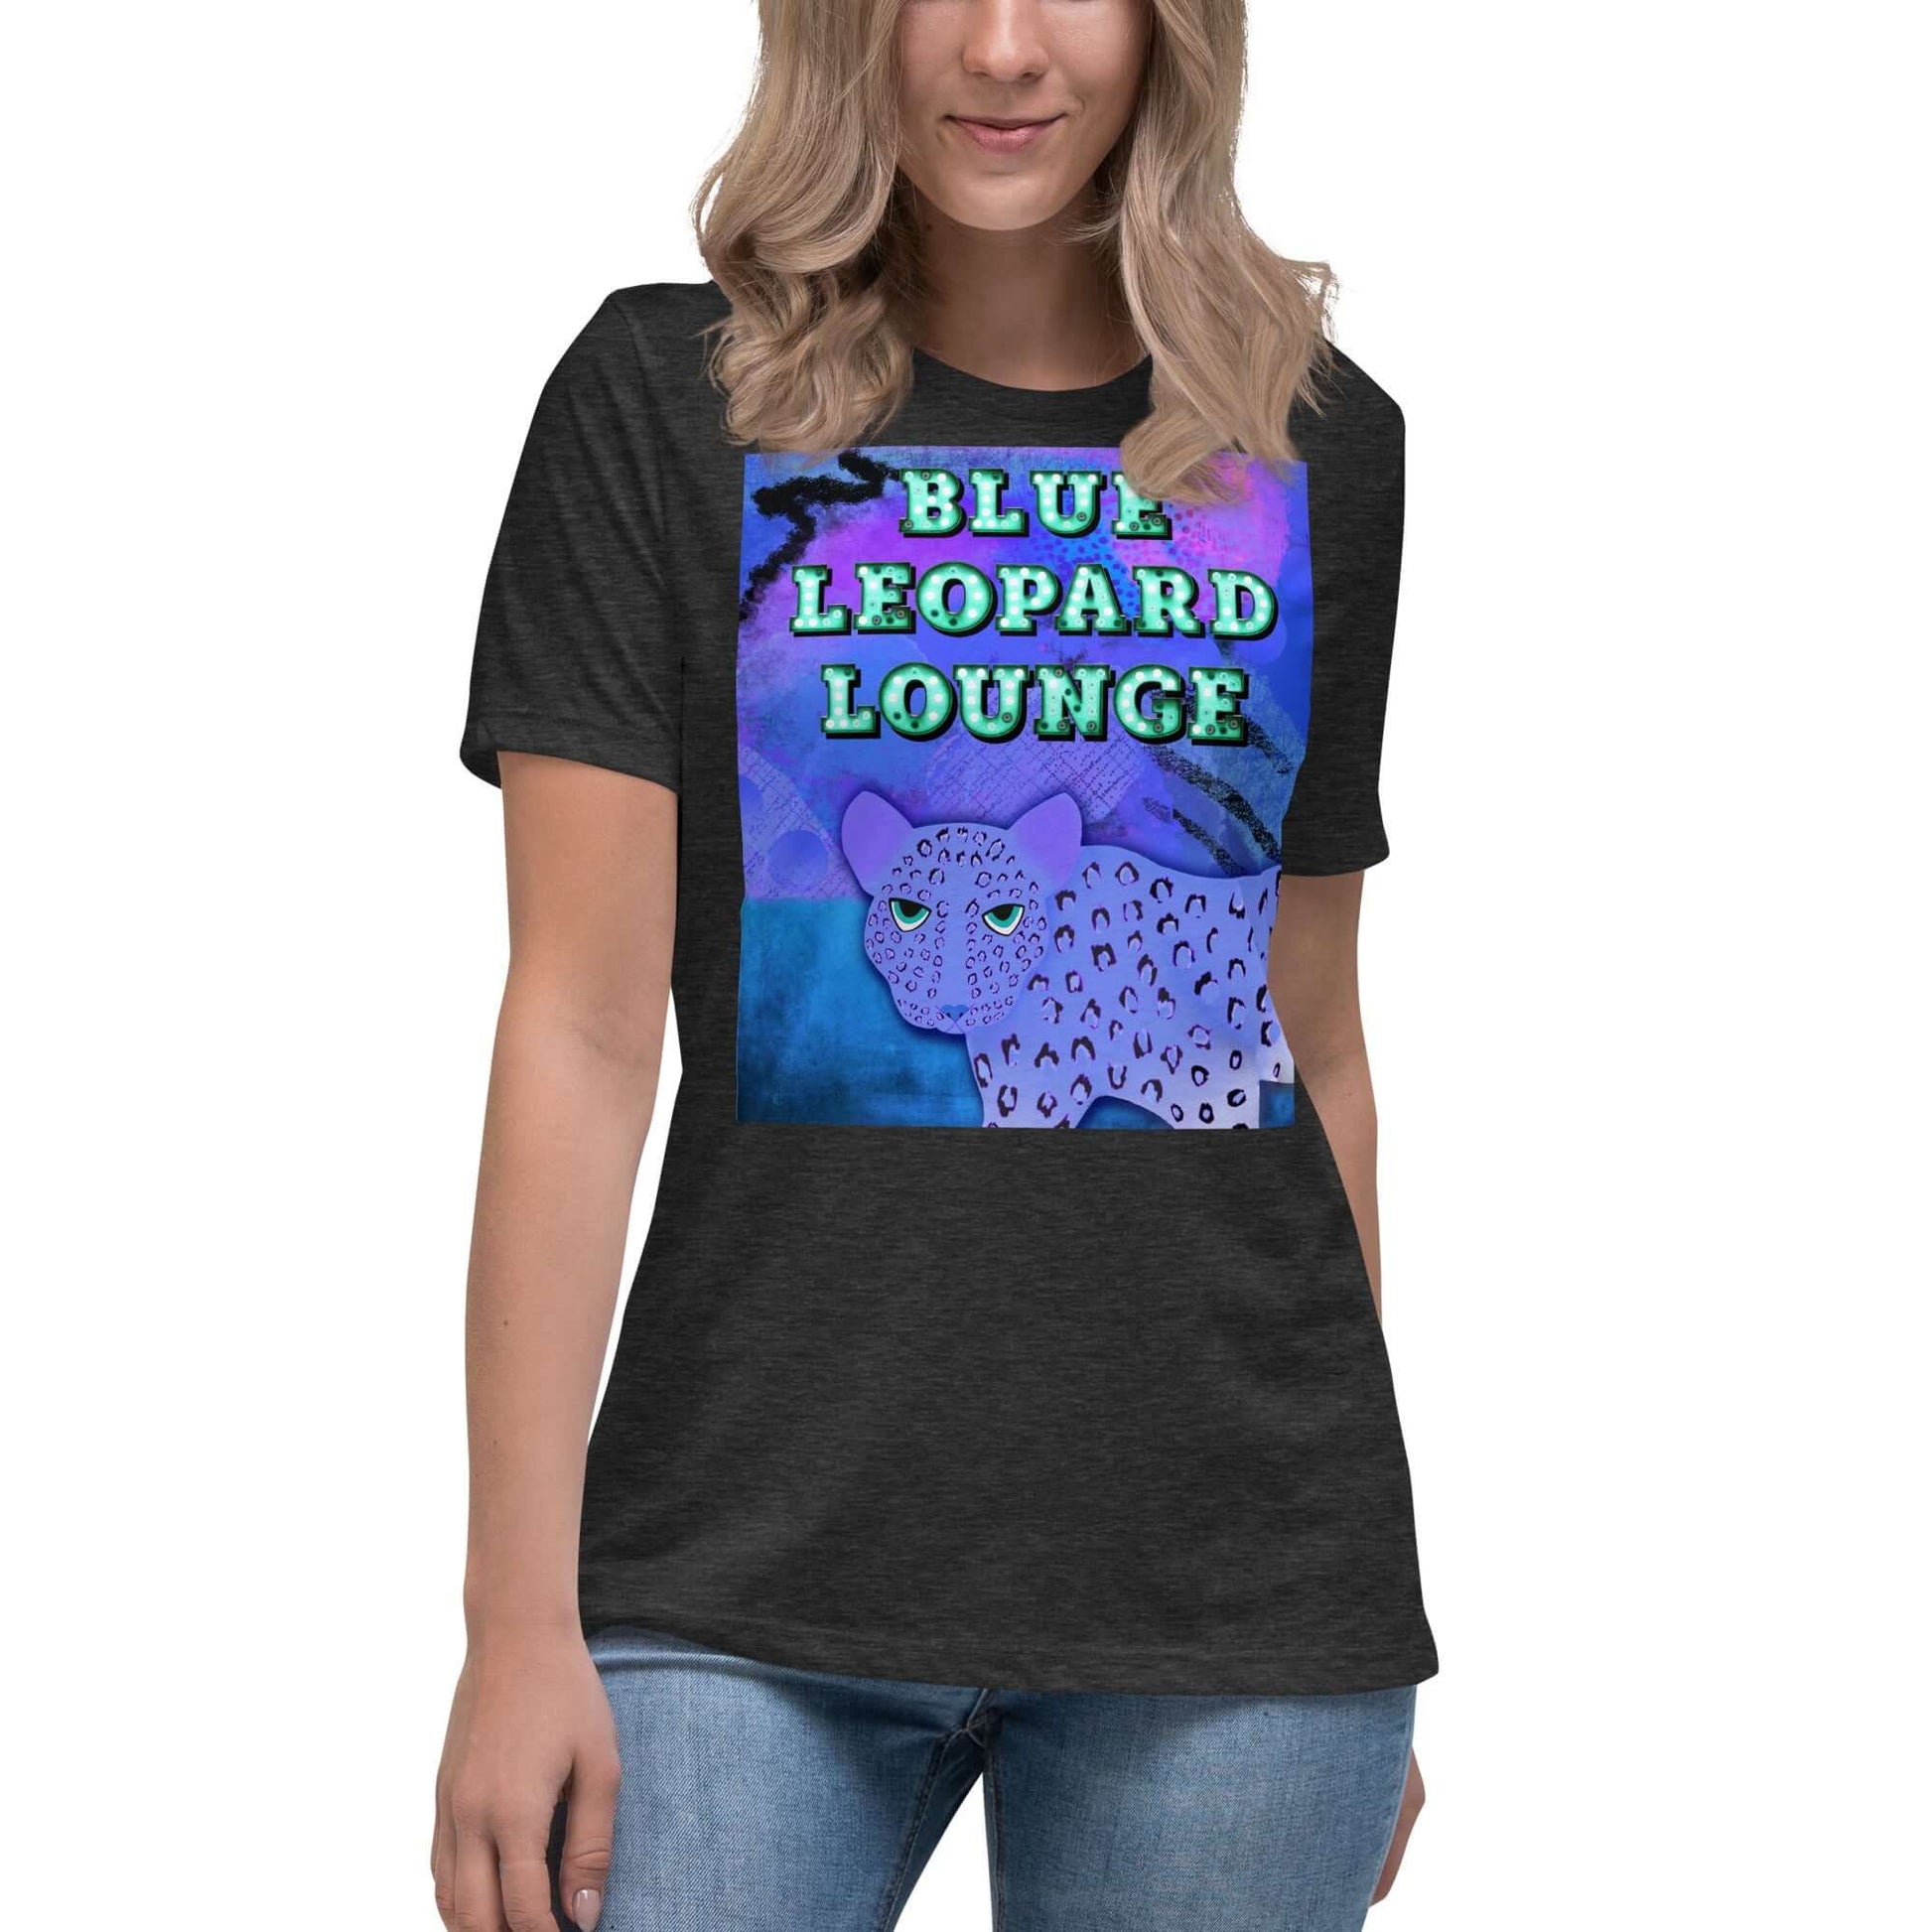 Purple Leopard on Blue and Purple Abstract Background with “Blue Leopard Lounge” Marquee Letters Women’s Short Sleeve Tee in Dark Gray Heather